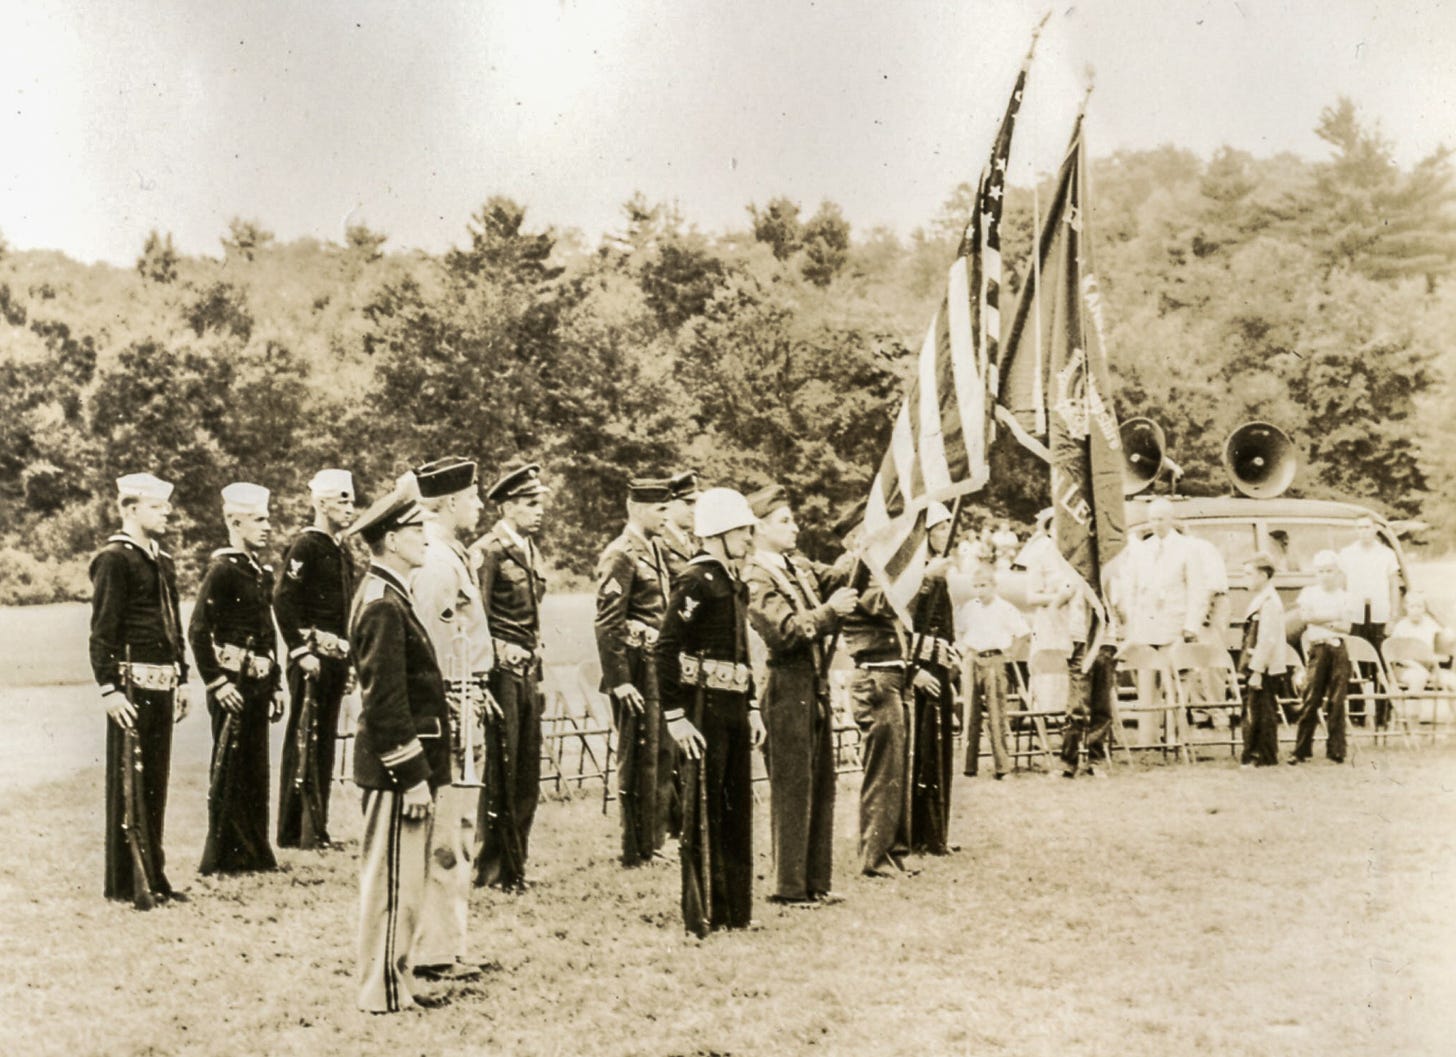 Men in uniform standing at attention